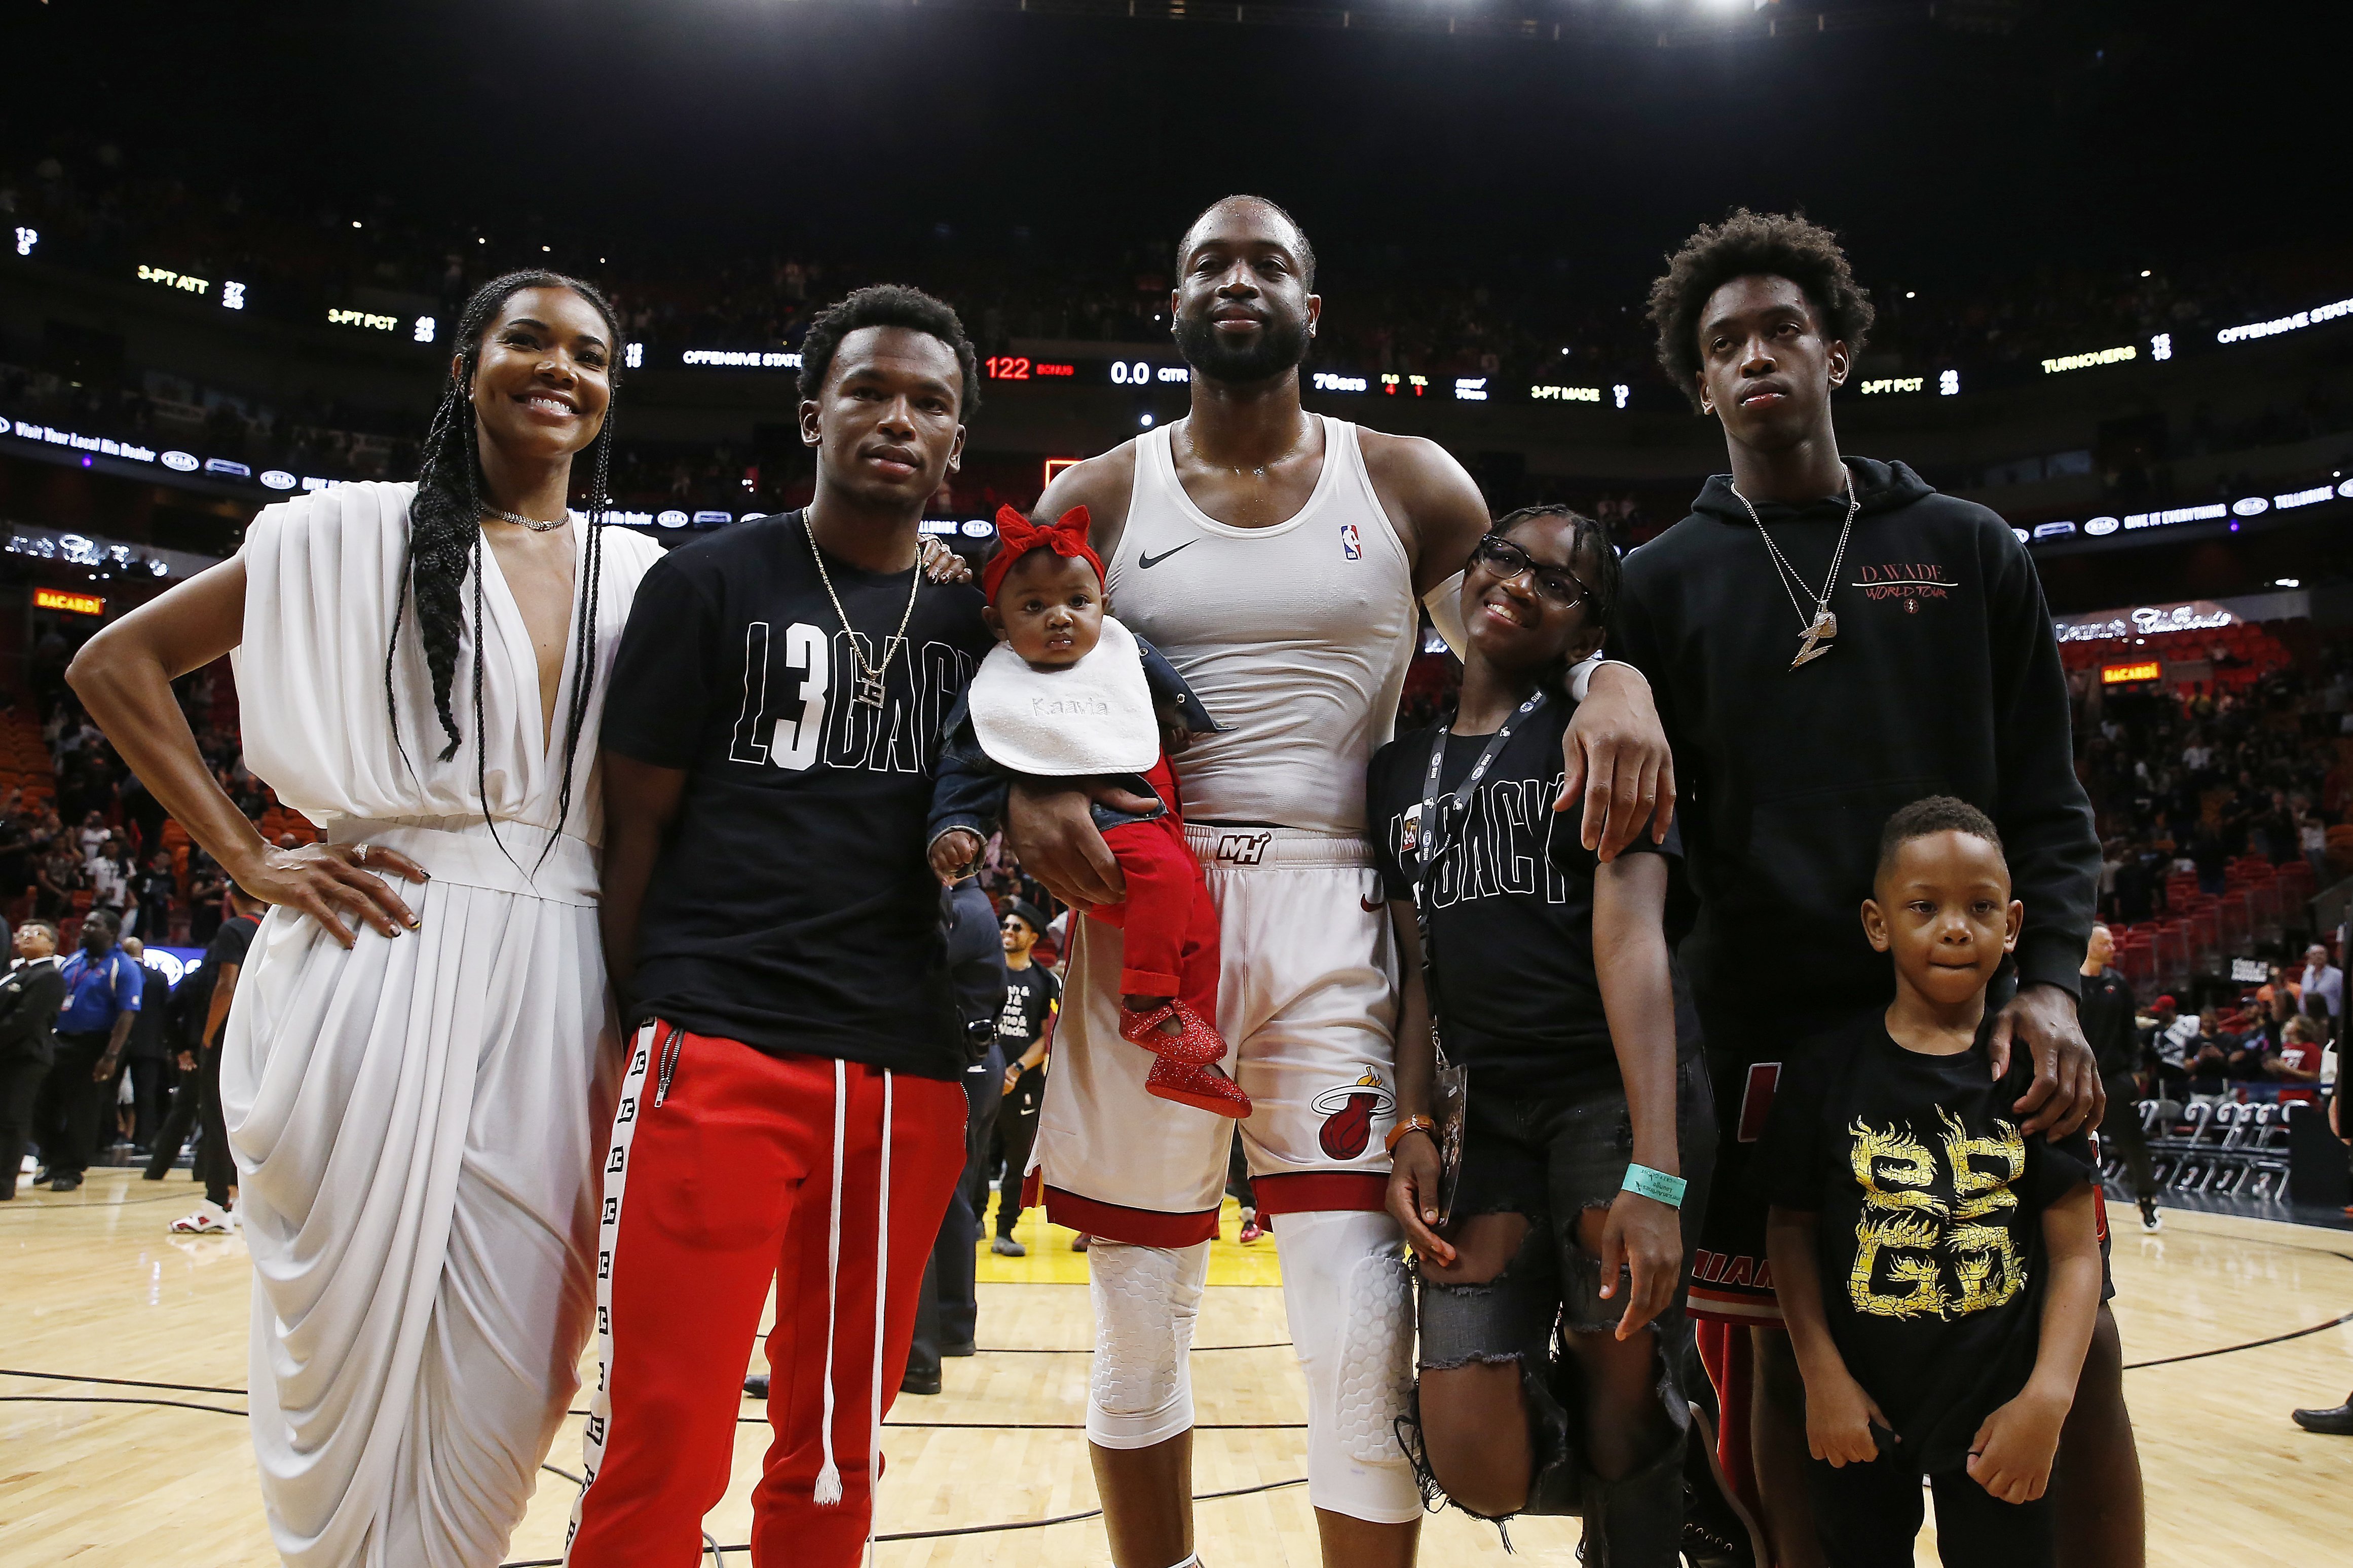 Dwayne Wade (center) with (L-R) wife Gabrielle Union, his nephew Dahveon, and kids Kaavia , Zion, Zaire & Xavier at Dwyane’s final home game in Miami on Apr.09, 2019 | Photo: Getty Images